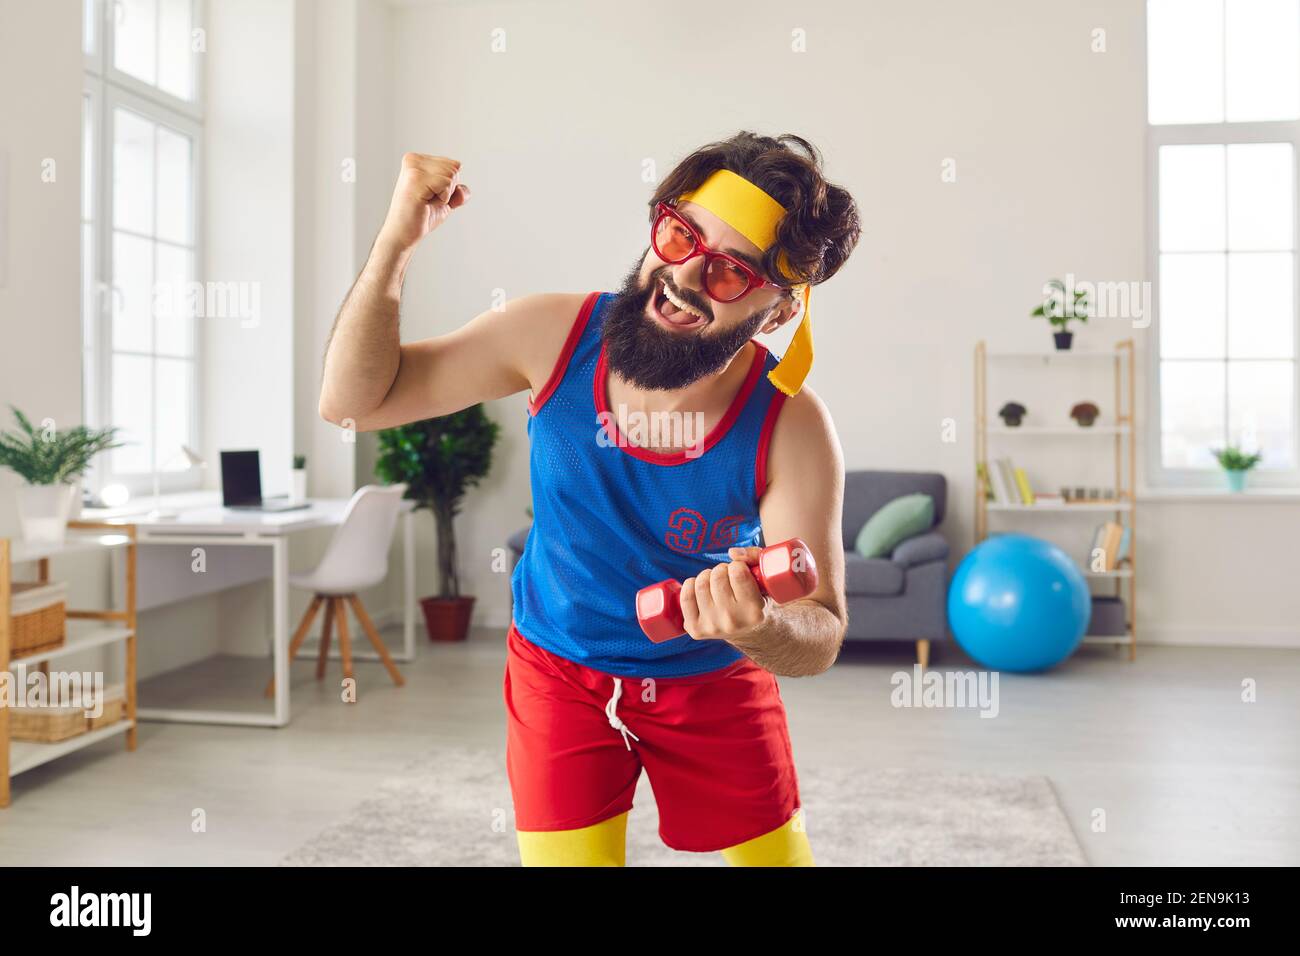 Crazy sports trainer holding dumbbell and clenching fist motivating you to exercise Stock Photo